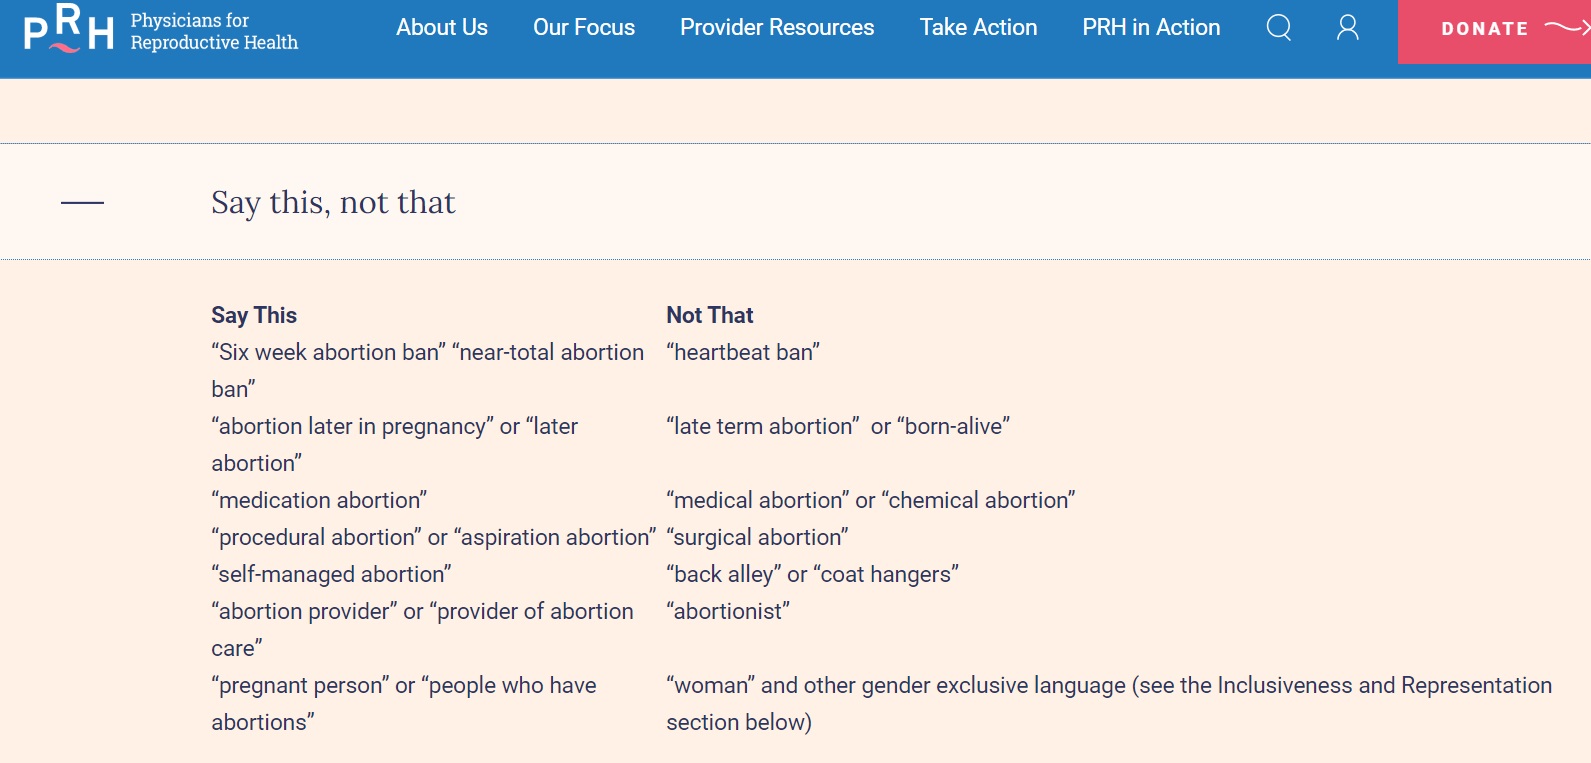 Image: Physicians for Reproductive Health PRH abortion language Say this not That